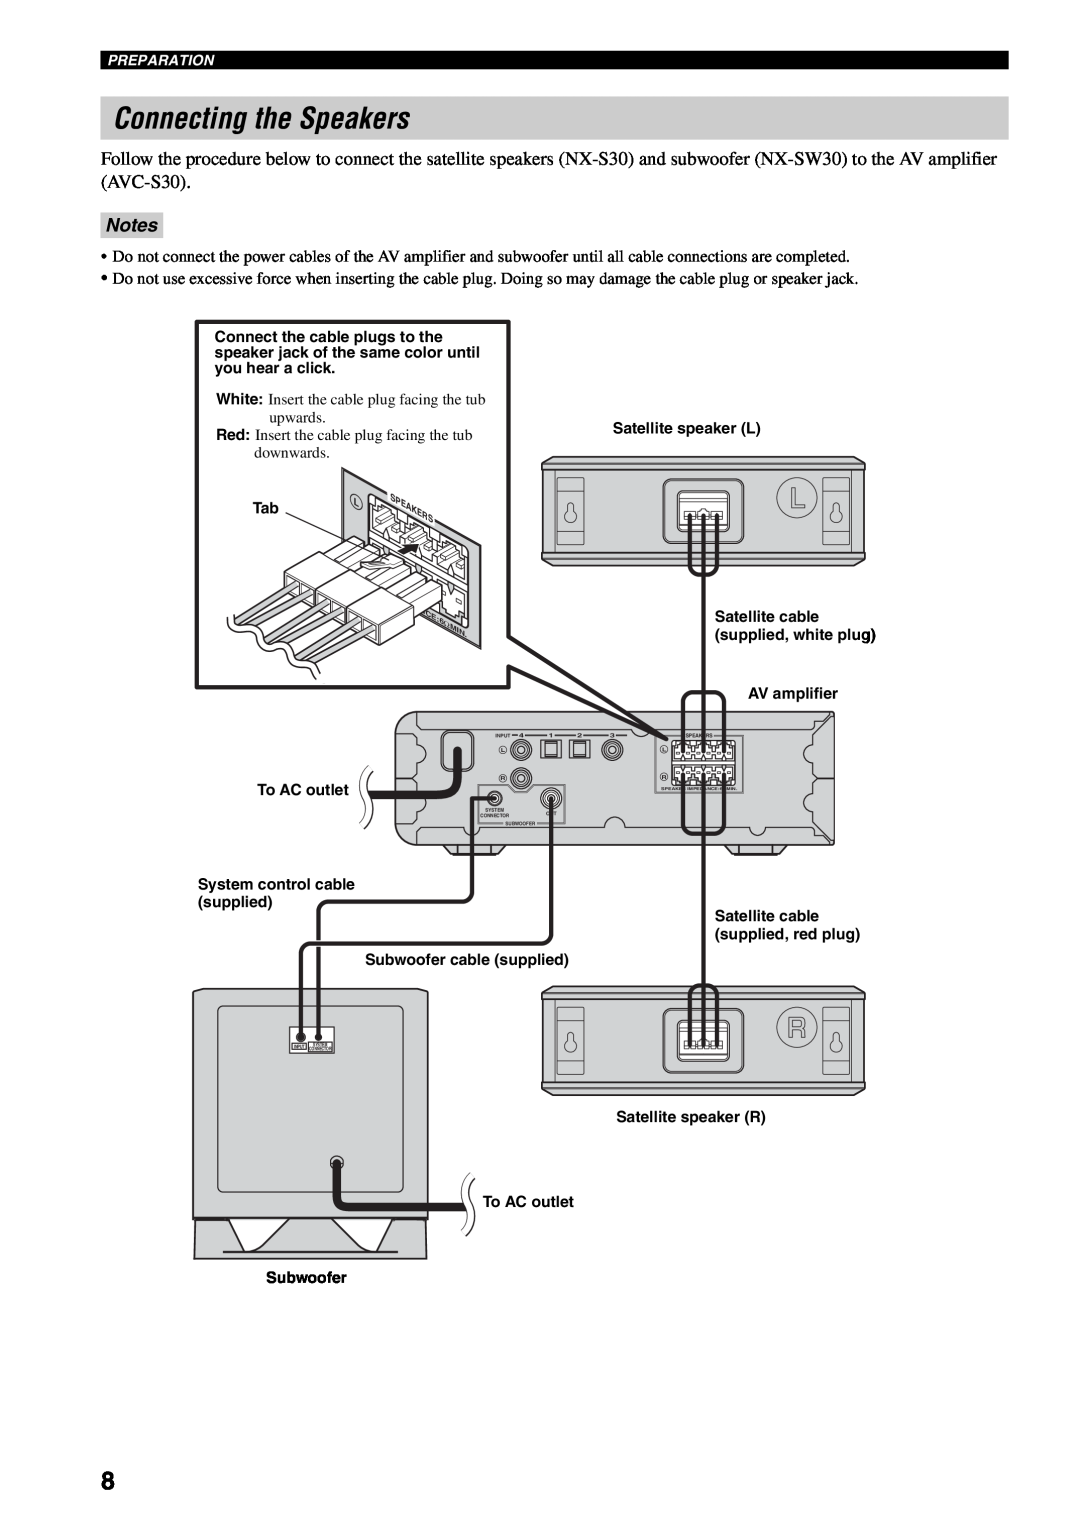 Yamaha AVX-S30 owner manual Connecting the Speakers, Notes 